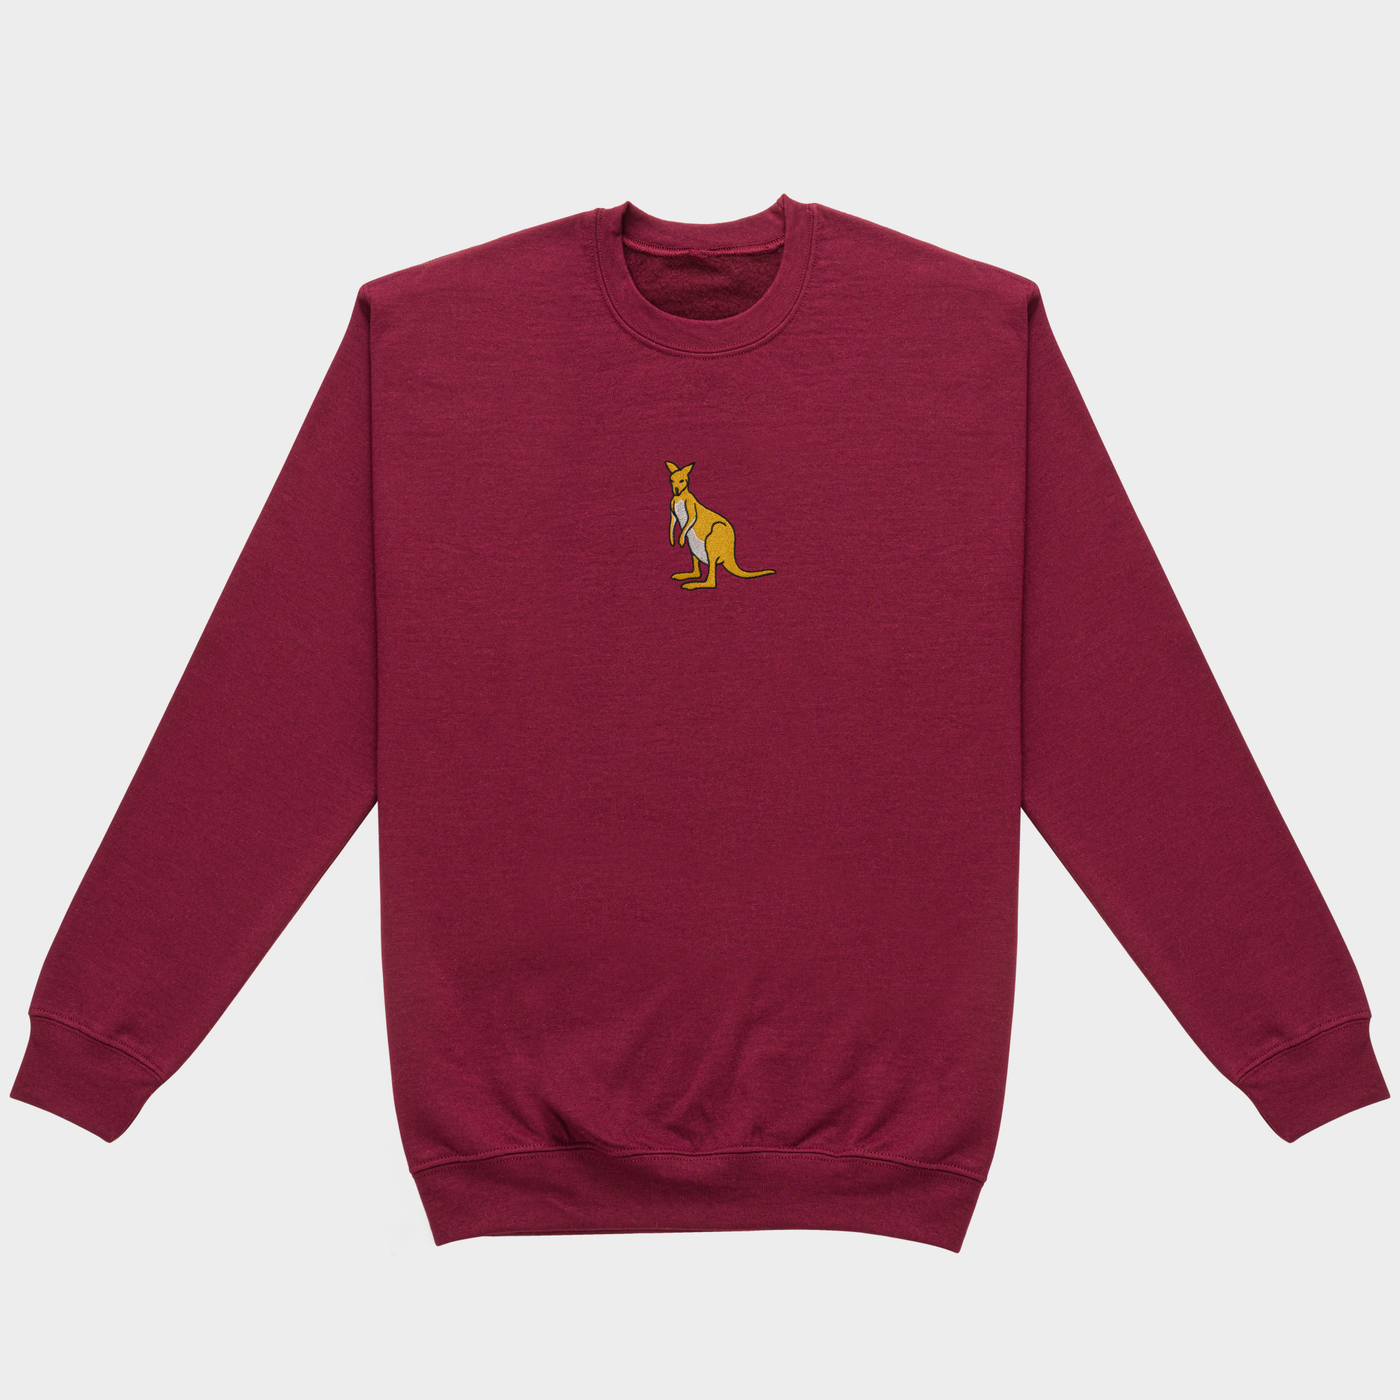 Bobby's Planet Women's Embroidered Kangaroo Sweatshirt from Australia Down Under Animals Collection in Maroon Color#color_maroon